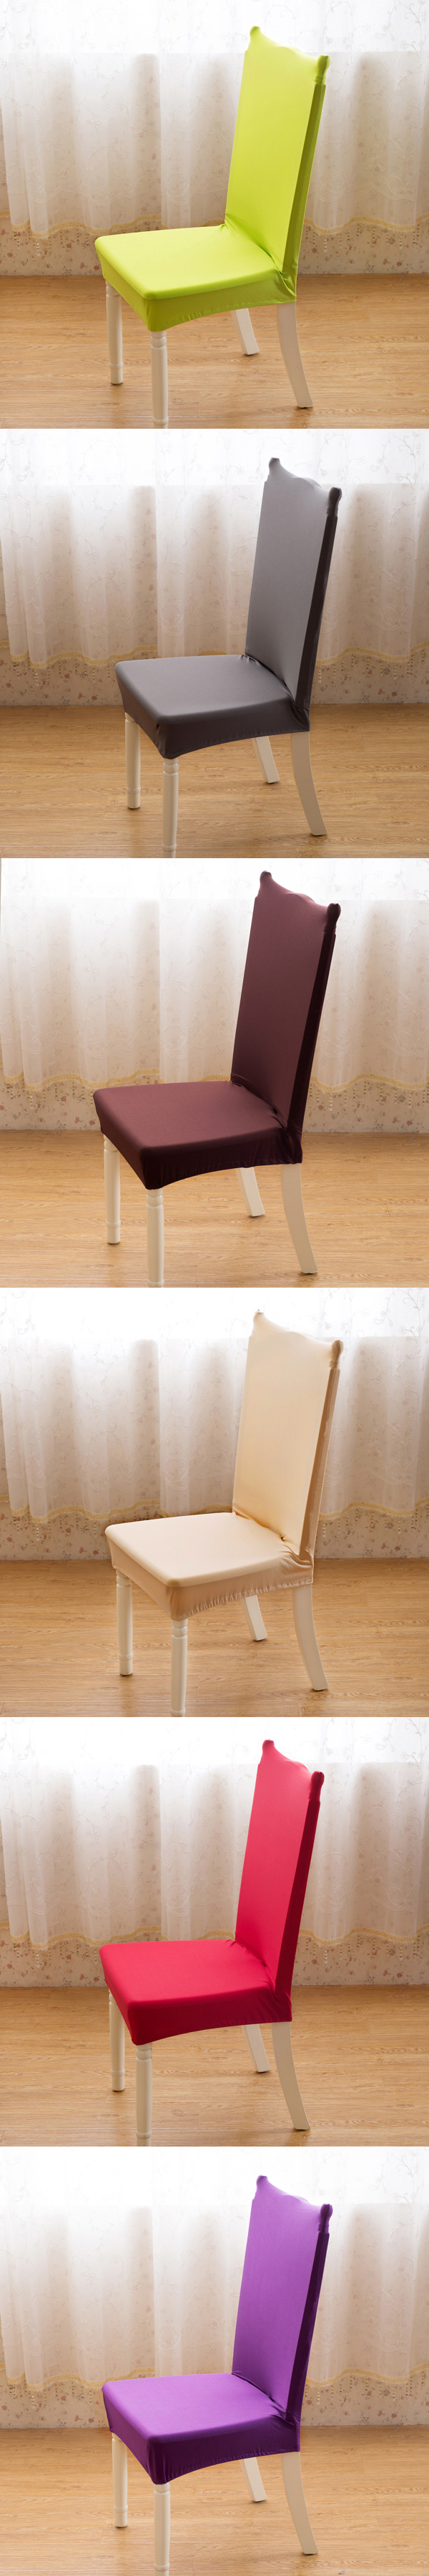 Honana-WX-916-Banquet-Elastic-Stretch-Spandex-Chair-Seat-Cover-Party-Dining-Room-Wedding-Restaurant--1088203-1